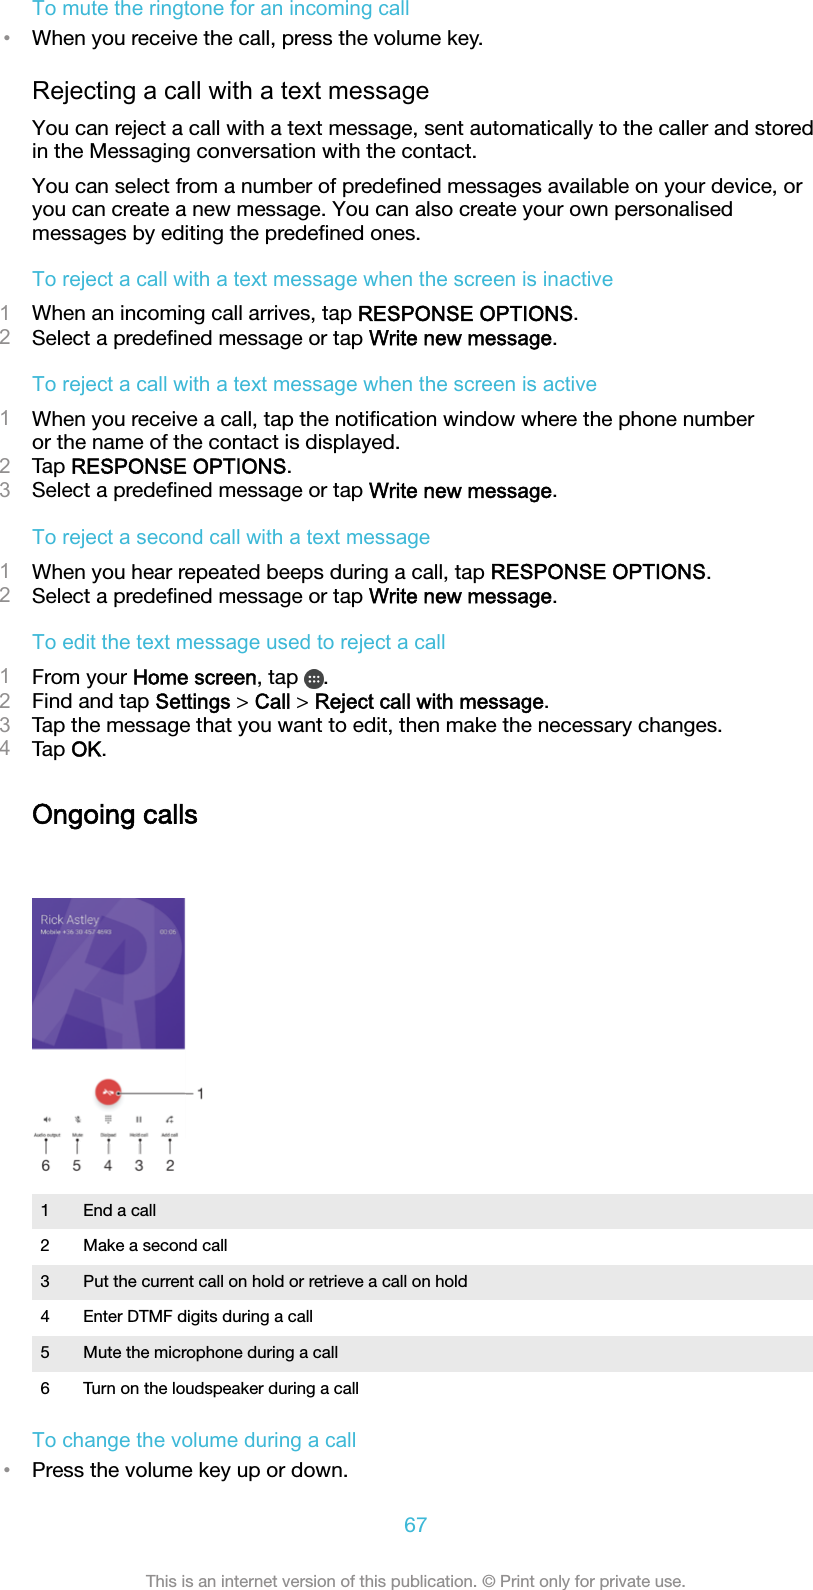 To mute the ringtone for an incoming call•When you receive the call, press the volume key.Rejecting a call with a text messageYou can reject a call with a text message, sent automatically to the caller and storedin the Messaging conversation with the contact.You can select from a number of predeﬁned messages available on your device, oryou can create a new message. You can also create your own personalisedmessages by editing the predeﬁned ones.To reject a call with a text message when the screen is inactive1When an incoming call arrives, tap RESPONSE OPTIONS.2Select a predeﬁned message or tap Write new message.To reject a call with a text message when the screen is active1When you receive a call, tap the notiﬁcation window where the phone numberor the name of the contact is displayed.2Tap RESPONSE OPTIONS.3Select a predeﬁned message or tap Write new message.To reject a second call with a text message1When you hear repeated beeps during a call, tap RESPONSE OPTIONS.2Select a predeﬁned message or tap Write new message.To edit the text message used to reject a call1From your Home screen, tap  .2Find and tap Settings &gt; Call &gt; Reject call with message.3Tap the message that you want to edit, then make the necessary changes.4Tap OK.Ongoing calls1 End a call2 Make a second call3 Put the current call on hold or retrieve a call on hold4 Enter DTMF digits during a call5 Mute the microphone during a call6 Turn on the loudspeaker during a callTo change the volume during a call•Press the volume key up or down.67This is an internet version of this publication. © Print only for private use.